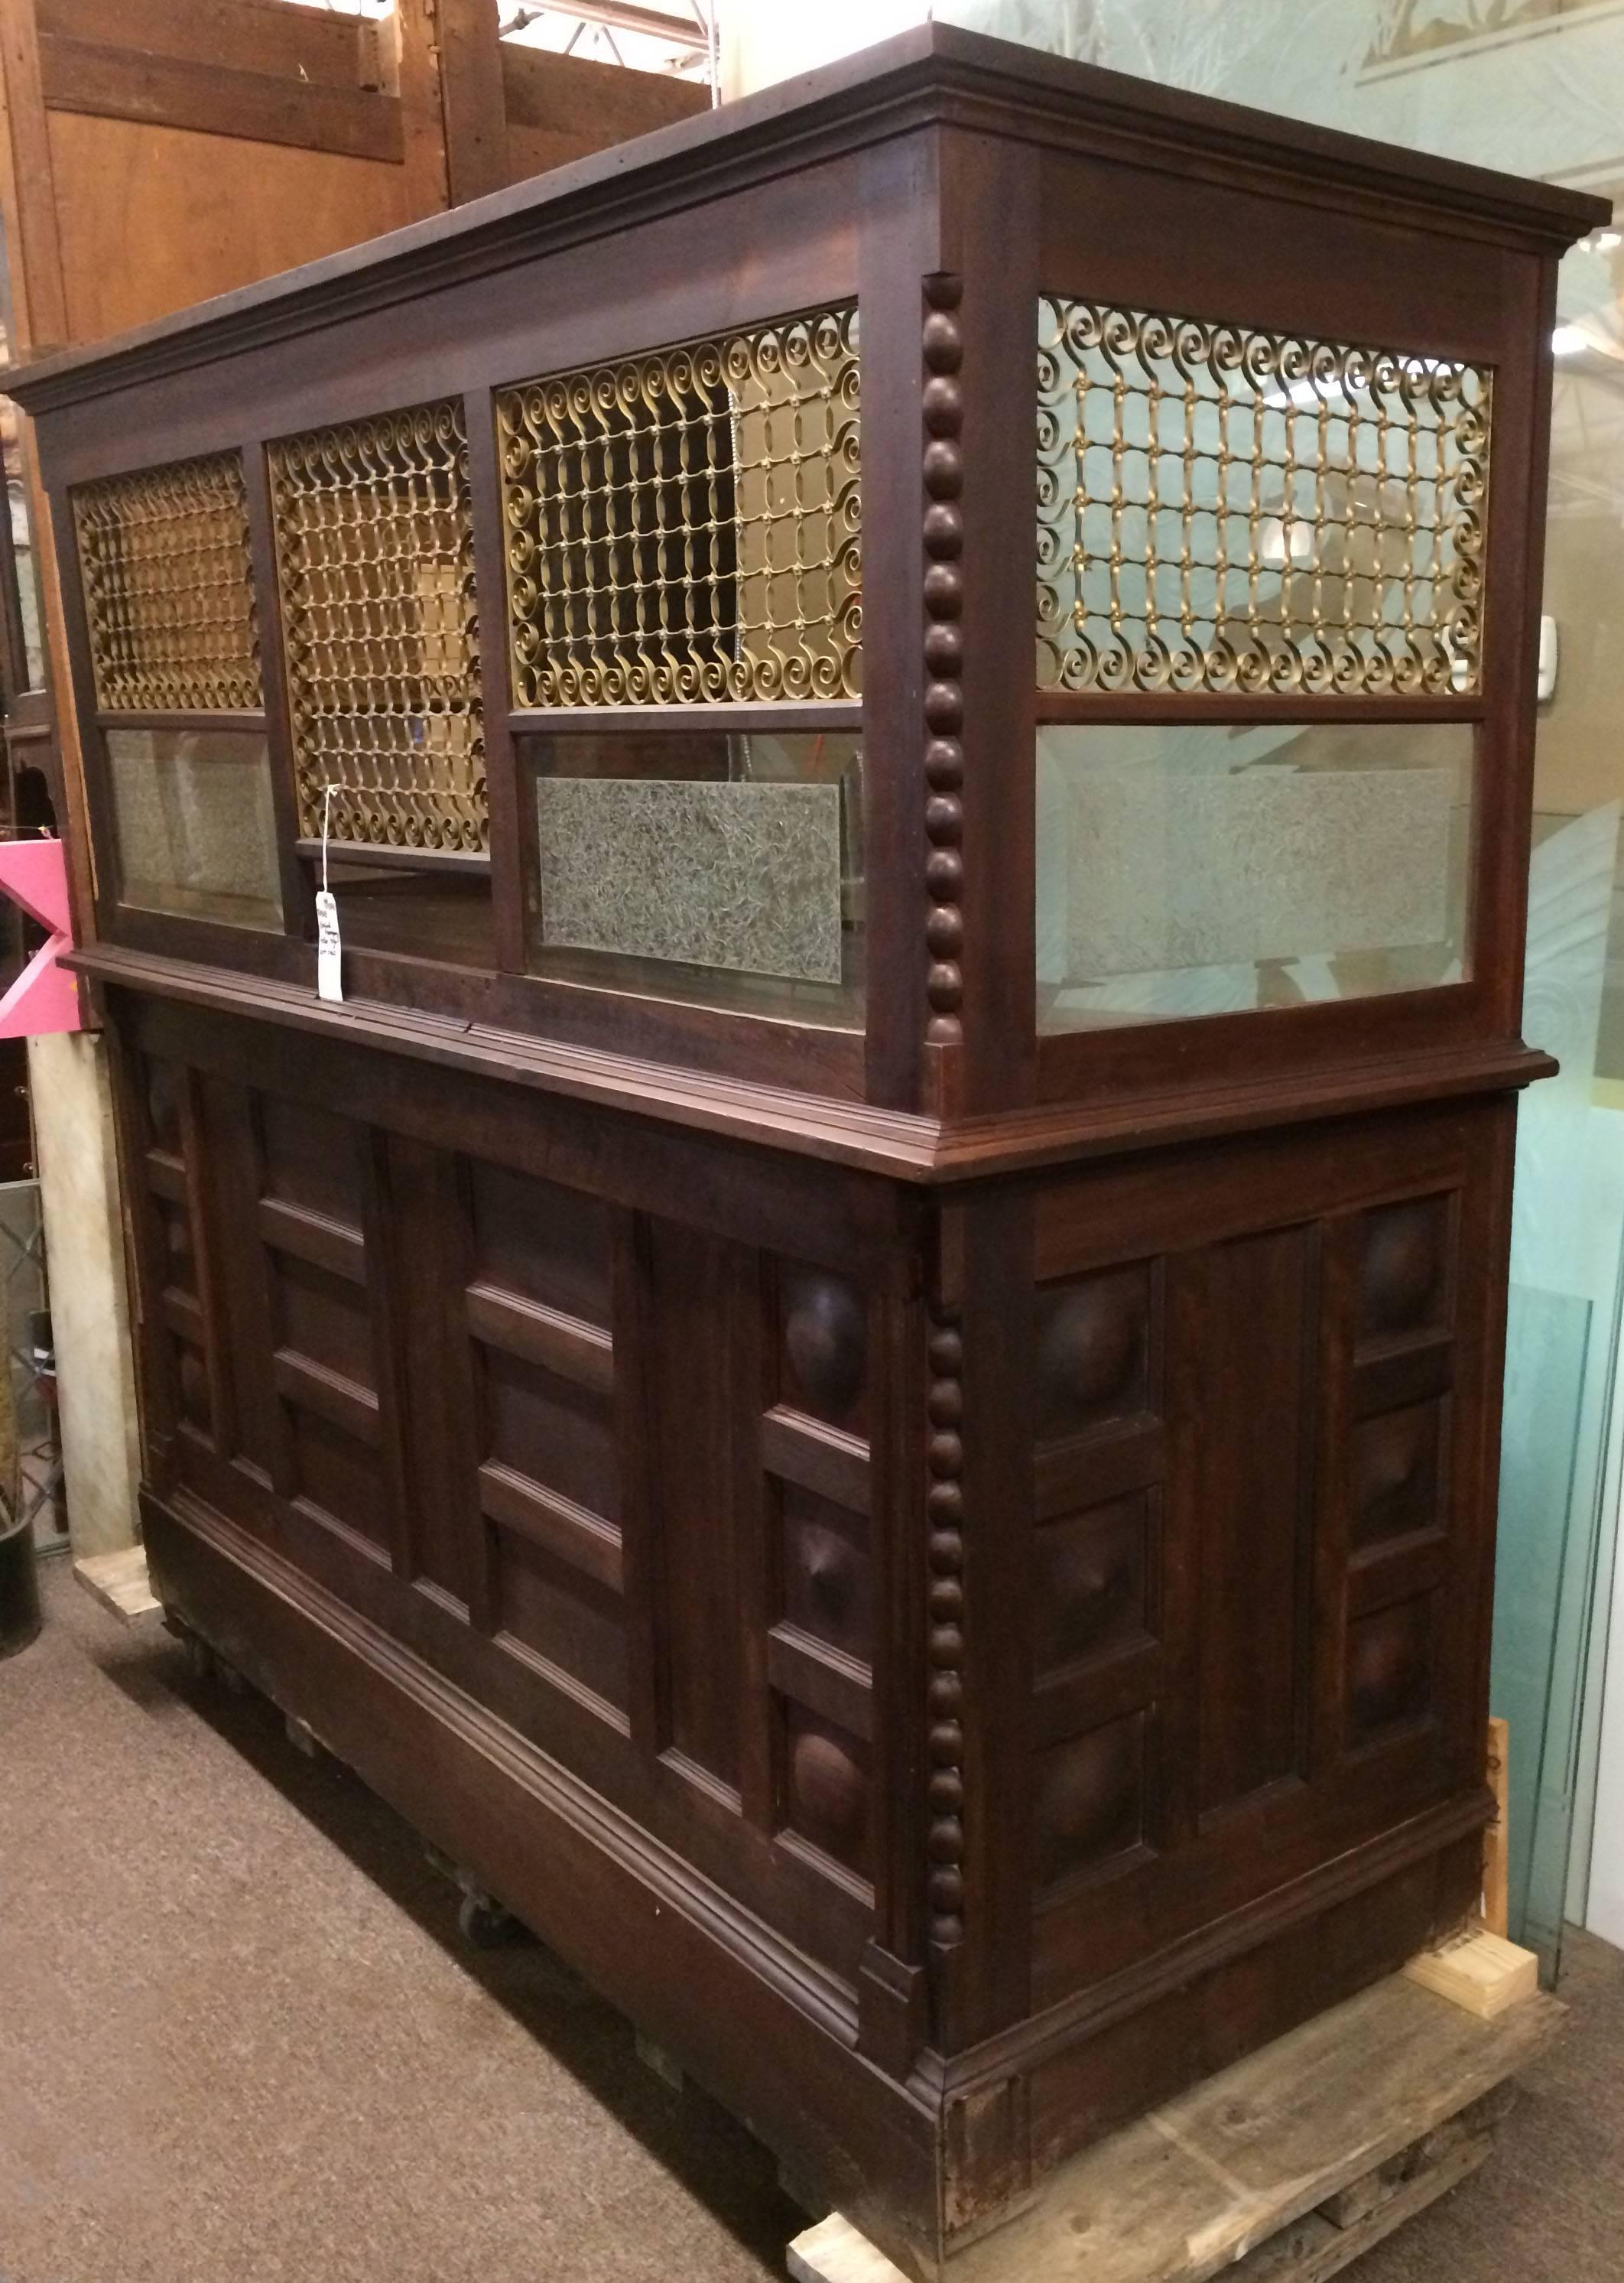 This antiques teller cage may have been from a bank or anywhere money was exchanged. Piece of the original labels with wiring info are still attached on the top inside of the cage. Made from raised paneled mahogany, bronze grates and frosted glass,